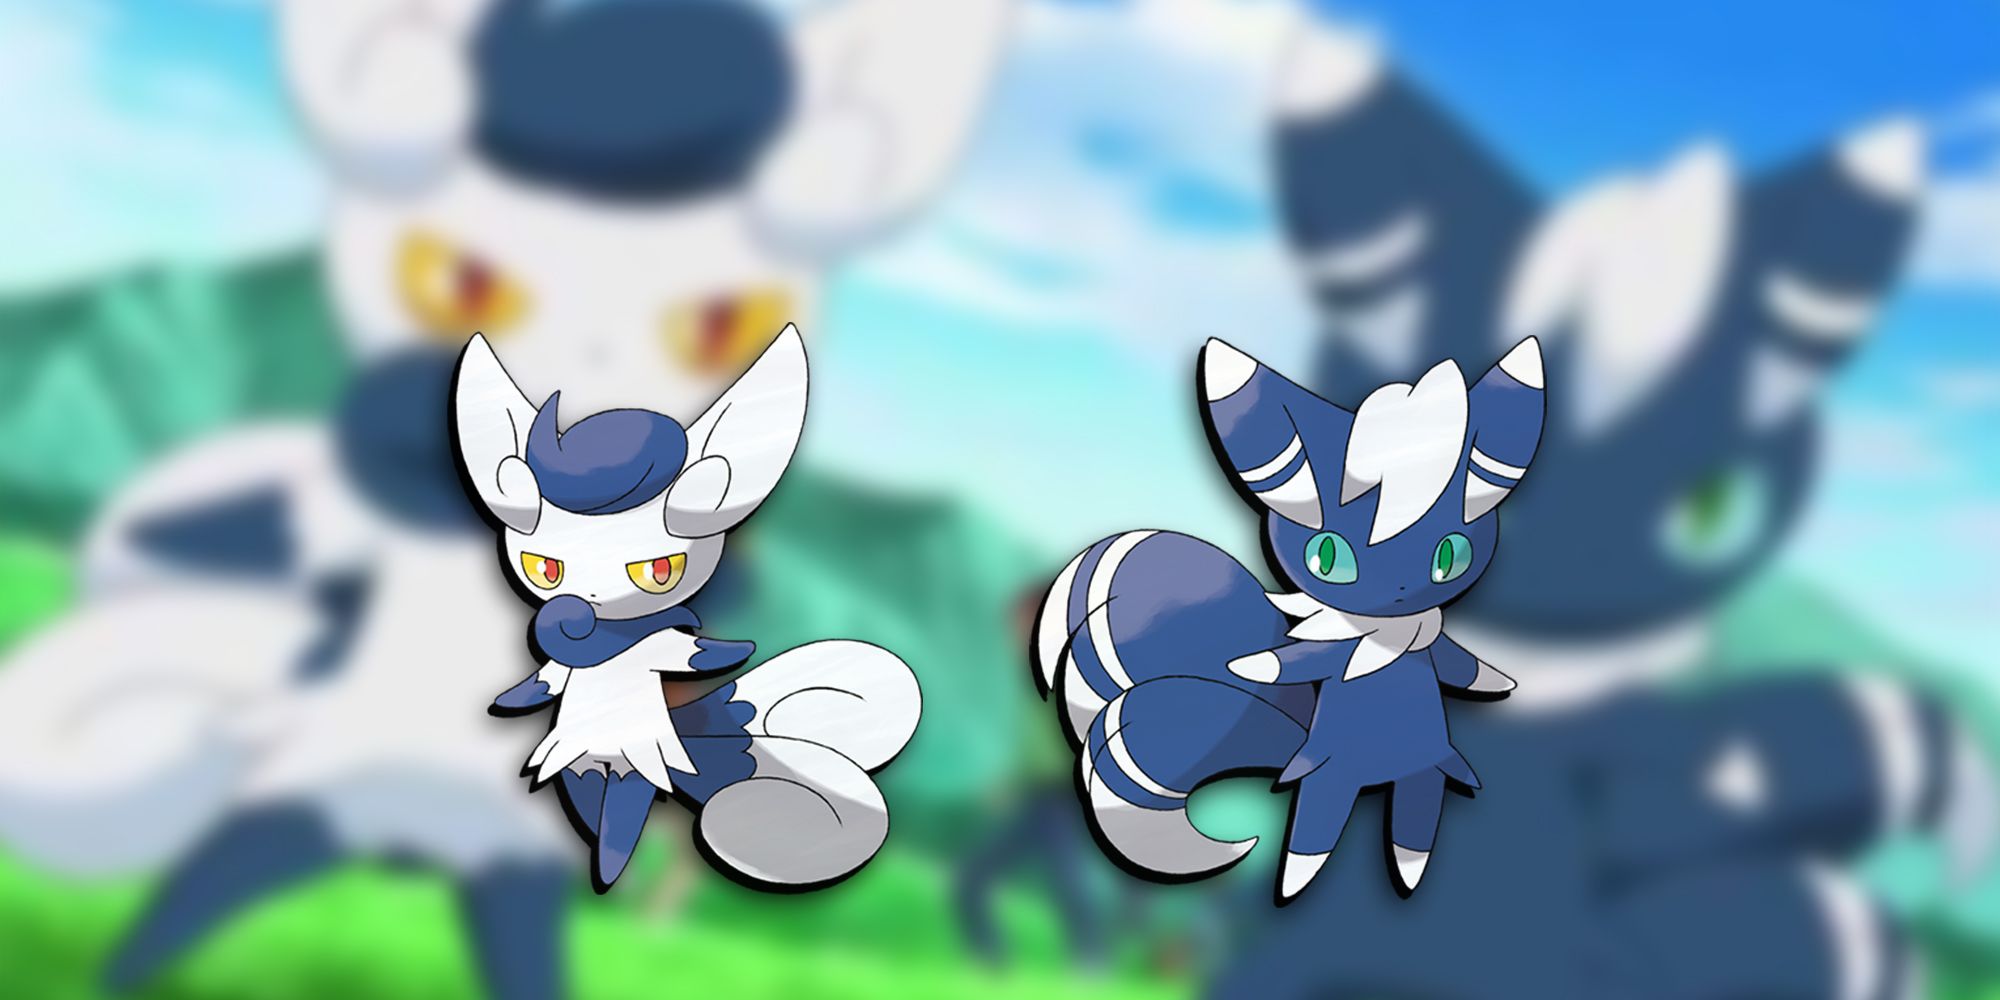 Pokemon - Meowstic Male and Female Forms Overlaid On Image Of Both Forms Being Used In Pokemon Anime